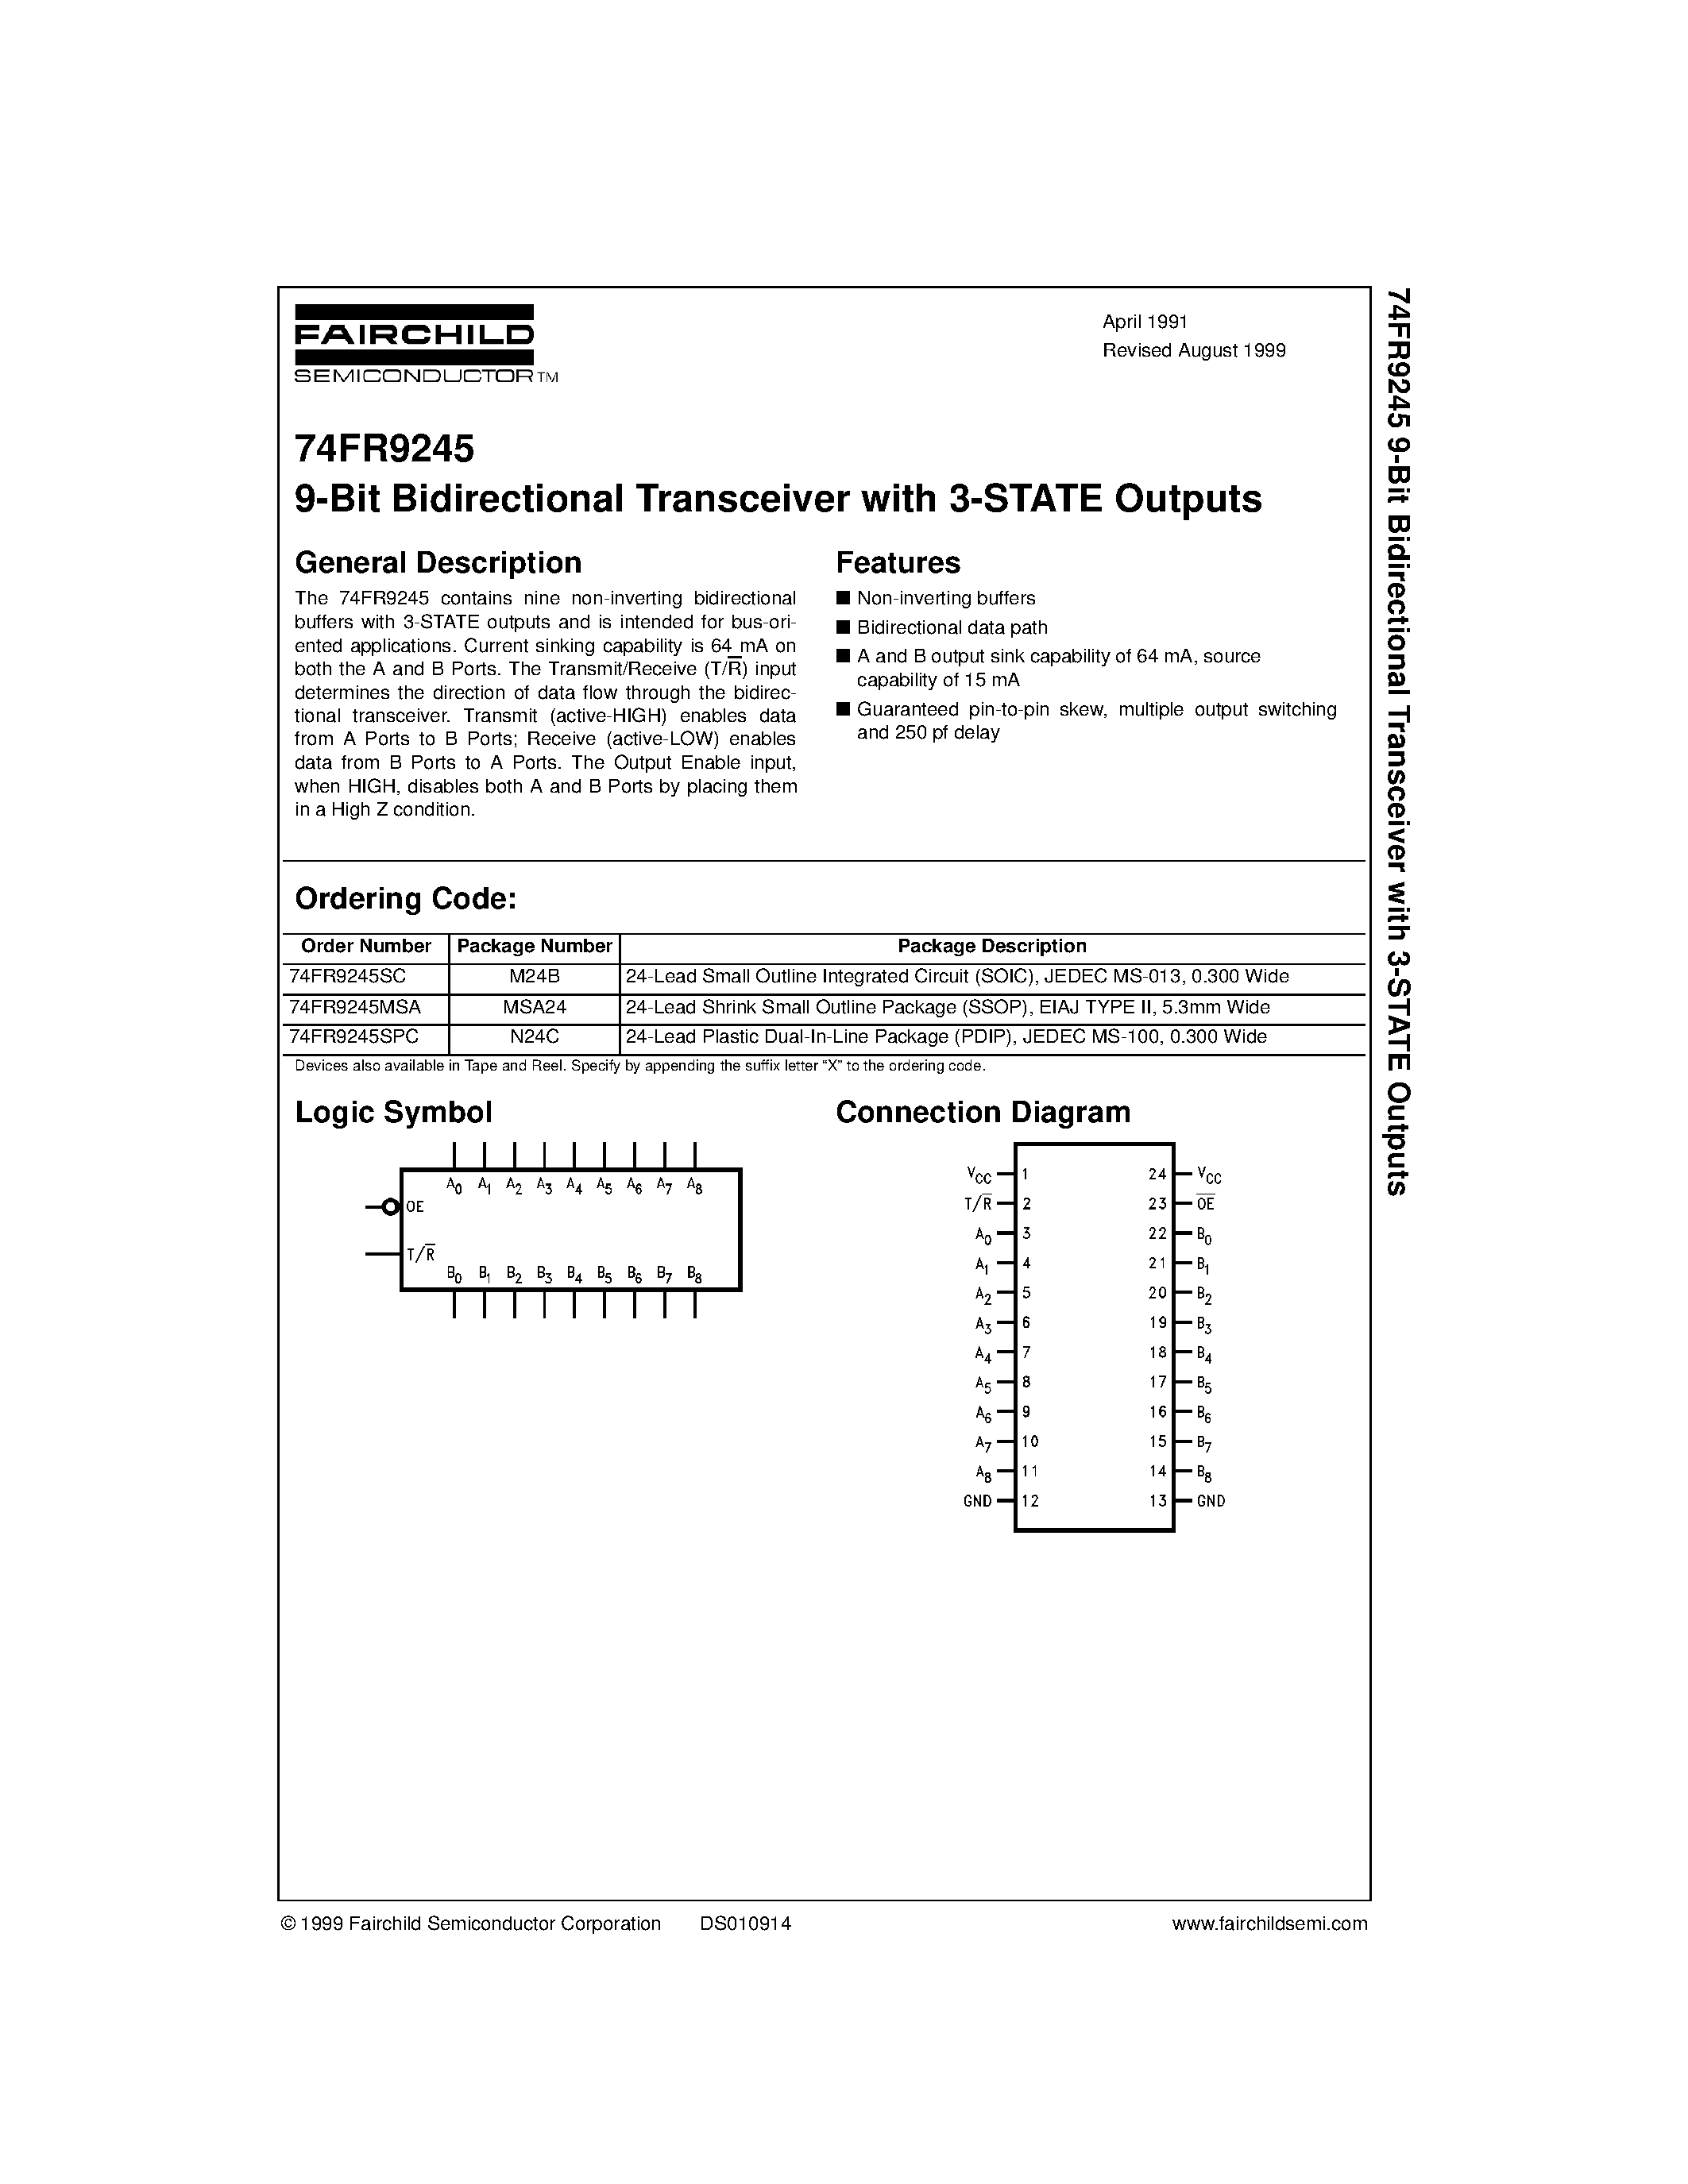 Datasheet 74FR9245SPC - 9-Bit Bidirectional Transceiver with 3-STATE Outputs page 1